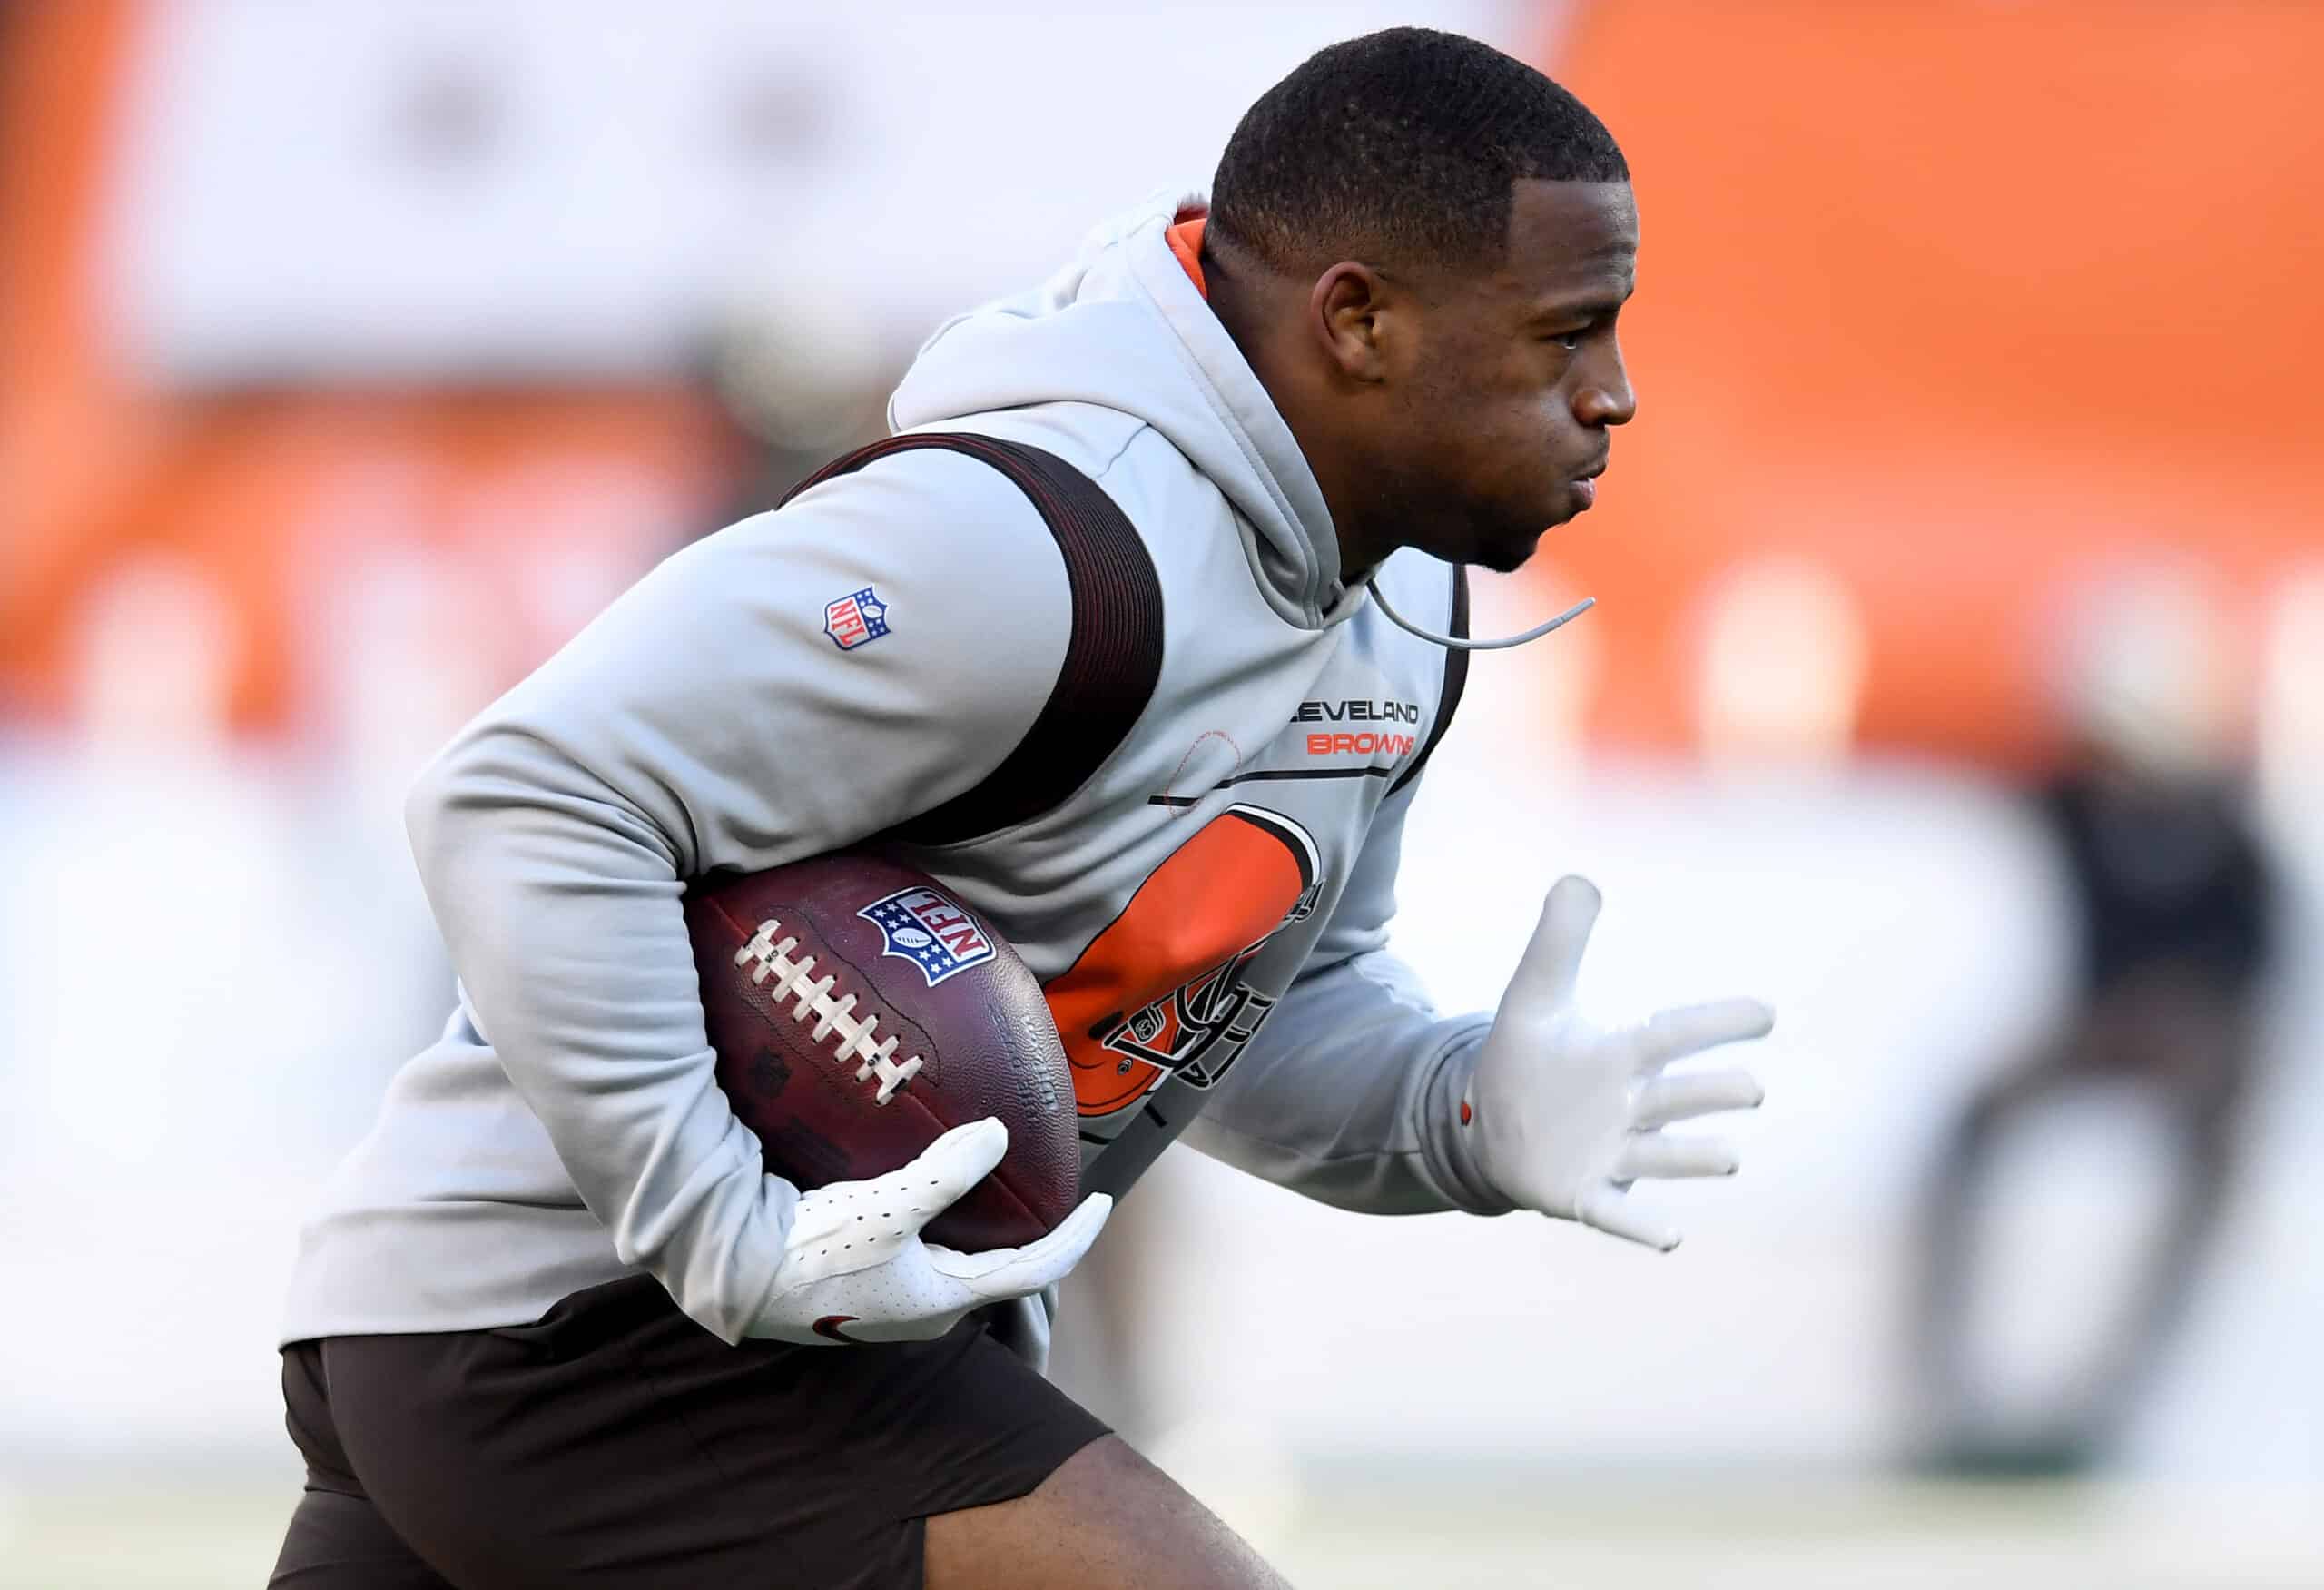 Nick Chubb #24 of the Cleveland Browns warms up prior to a game against the Las Vegas Raiders at FirstEnergy Stadium on December 20, 2021 in Cleveland, Ohio.